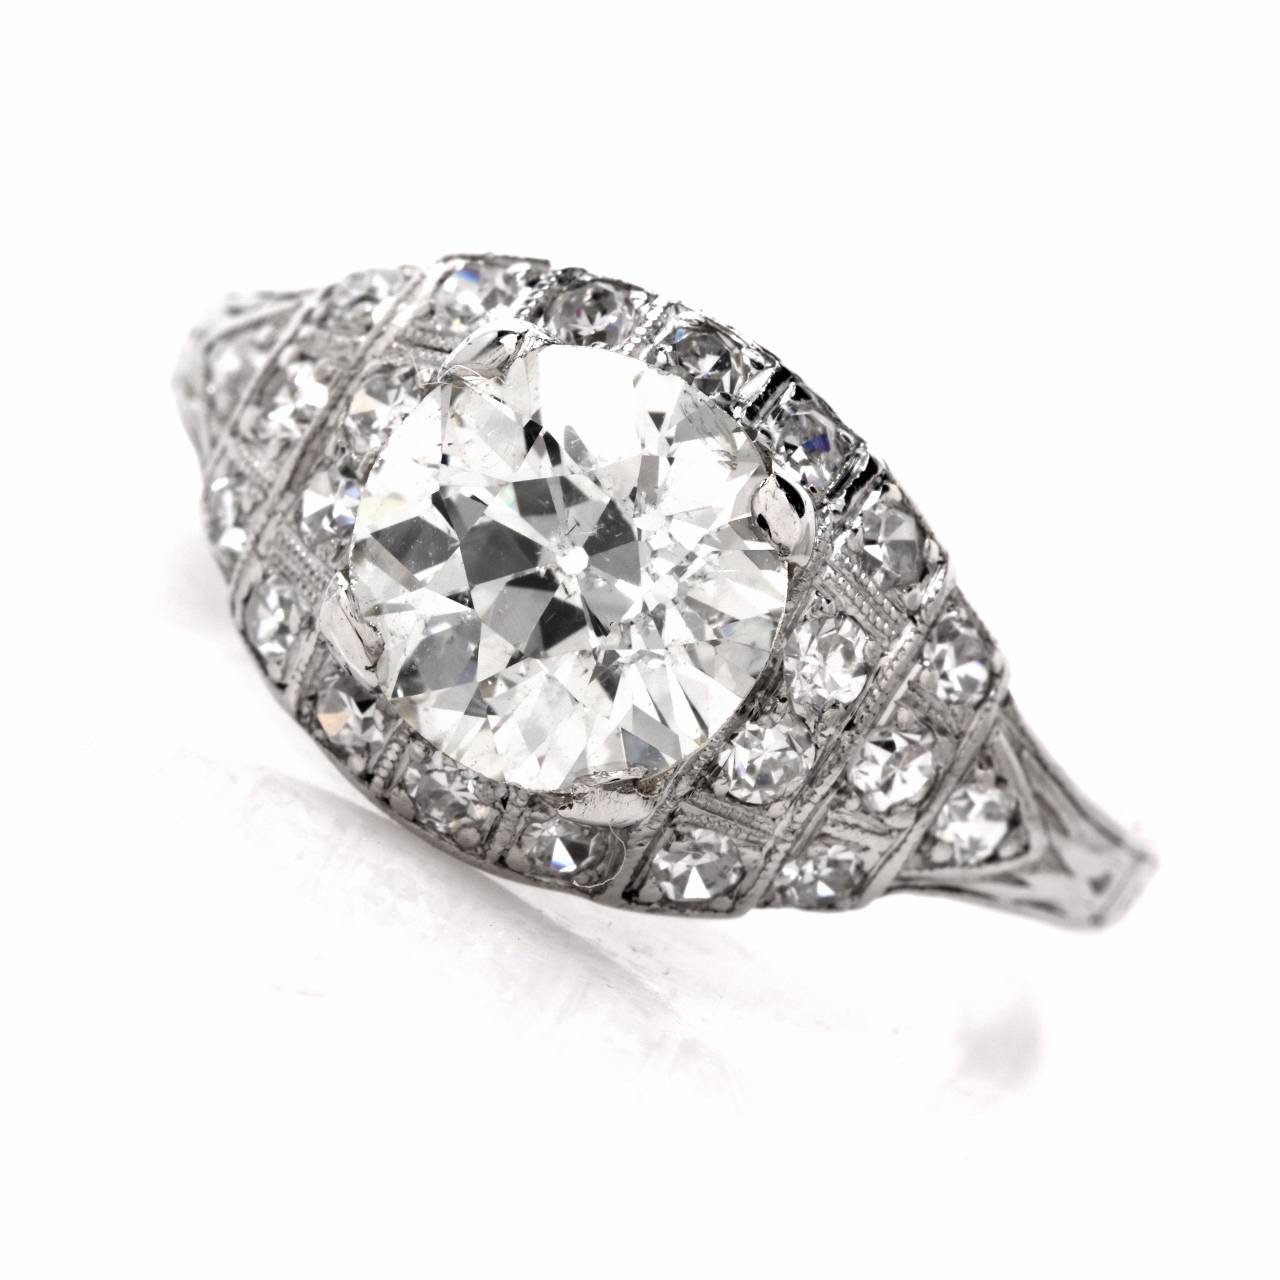 This authentic vintage engagement ring of immaculate design and alluring monochromatic aesthetic is crafted in solid platinum, weighs approx. 3.1 grams. Designed as an alluring convex marquise shape  plaque, this exquisite engagement ring exposes at